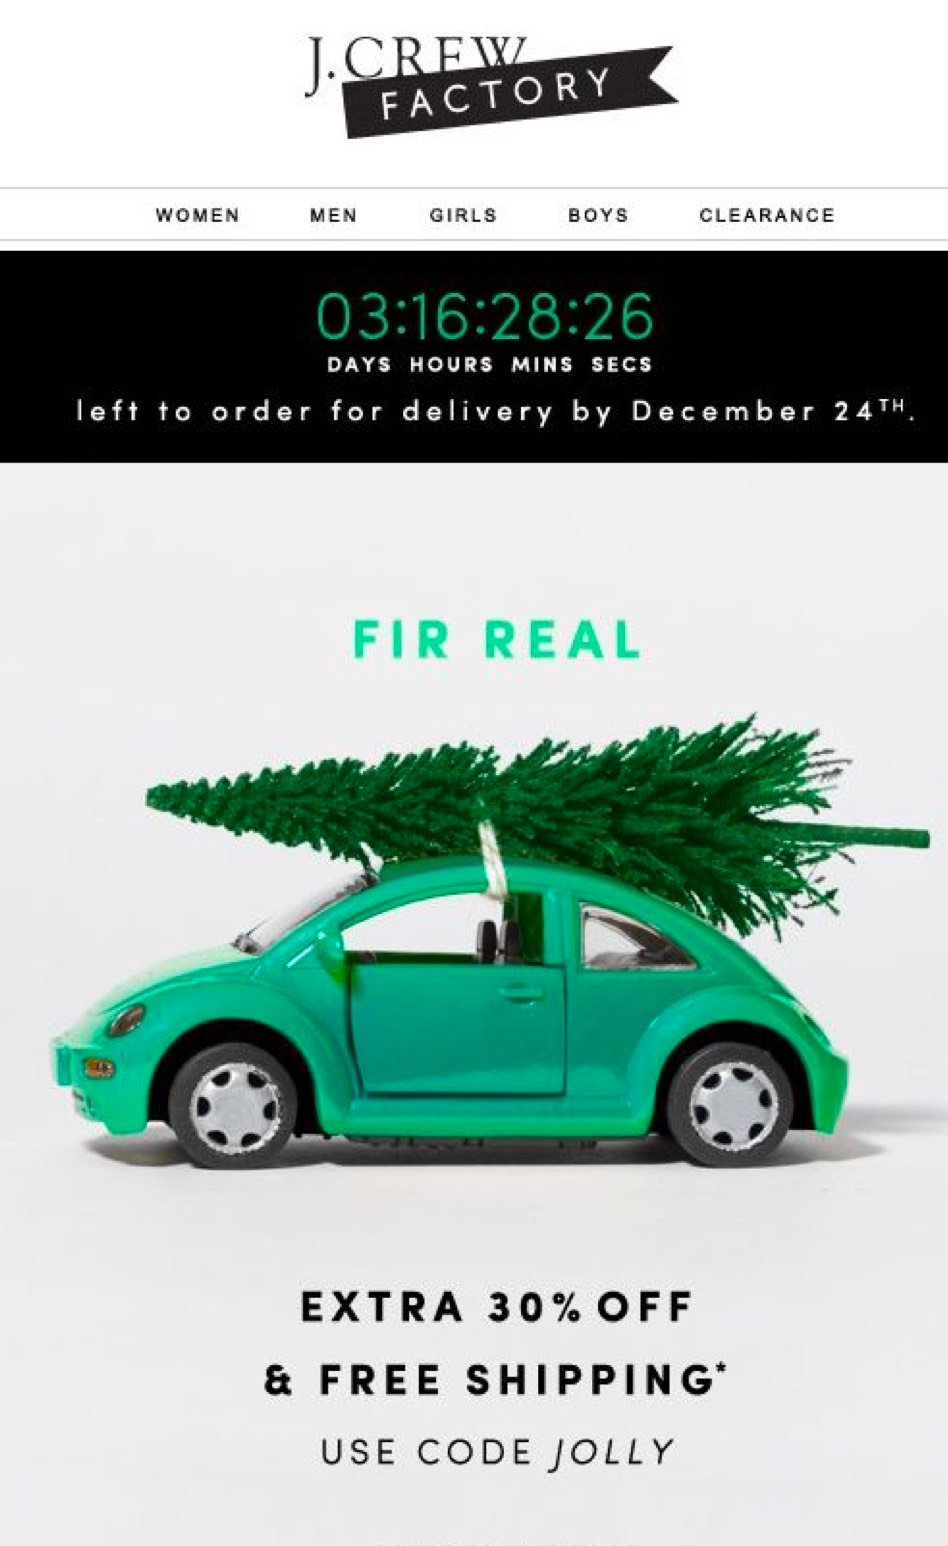 J. Crew Christmas newsletter example mint car carrying a pine tree